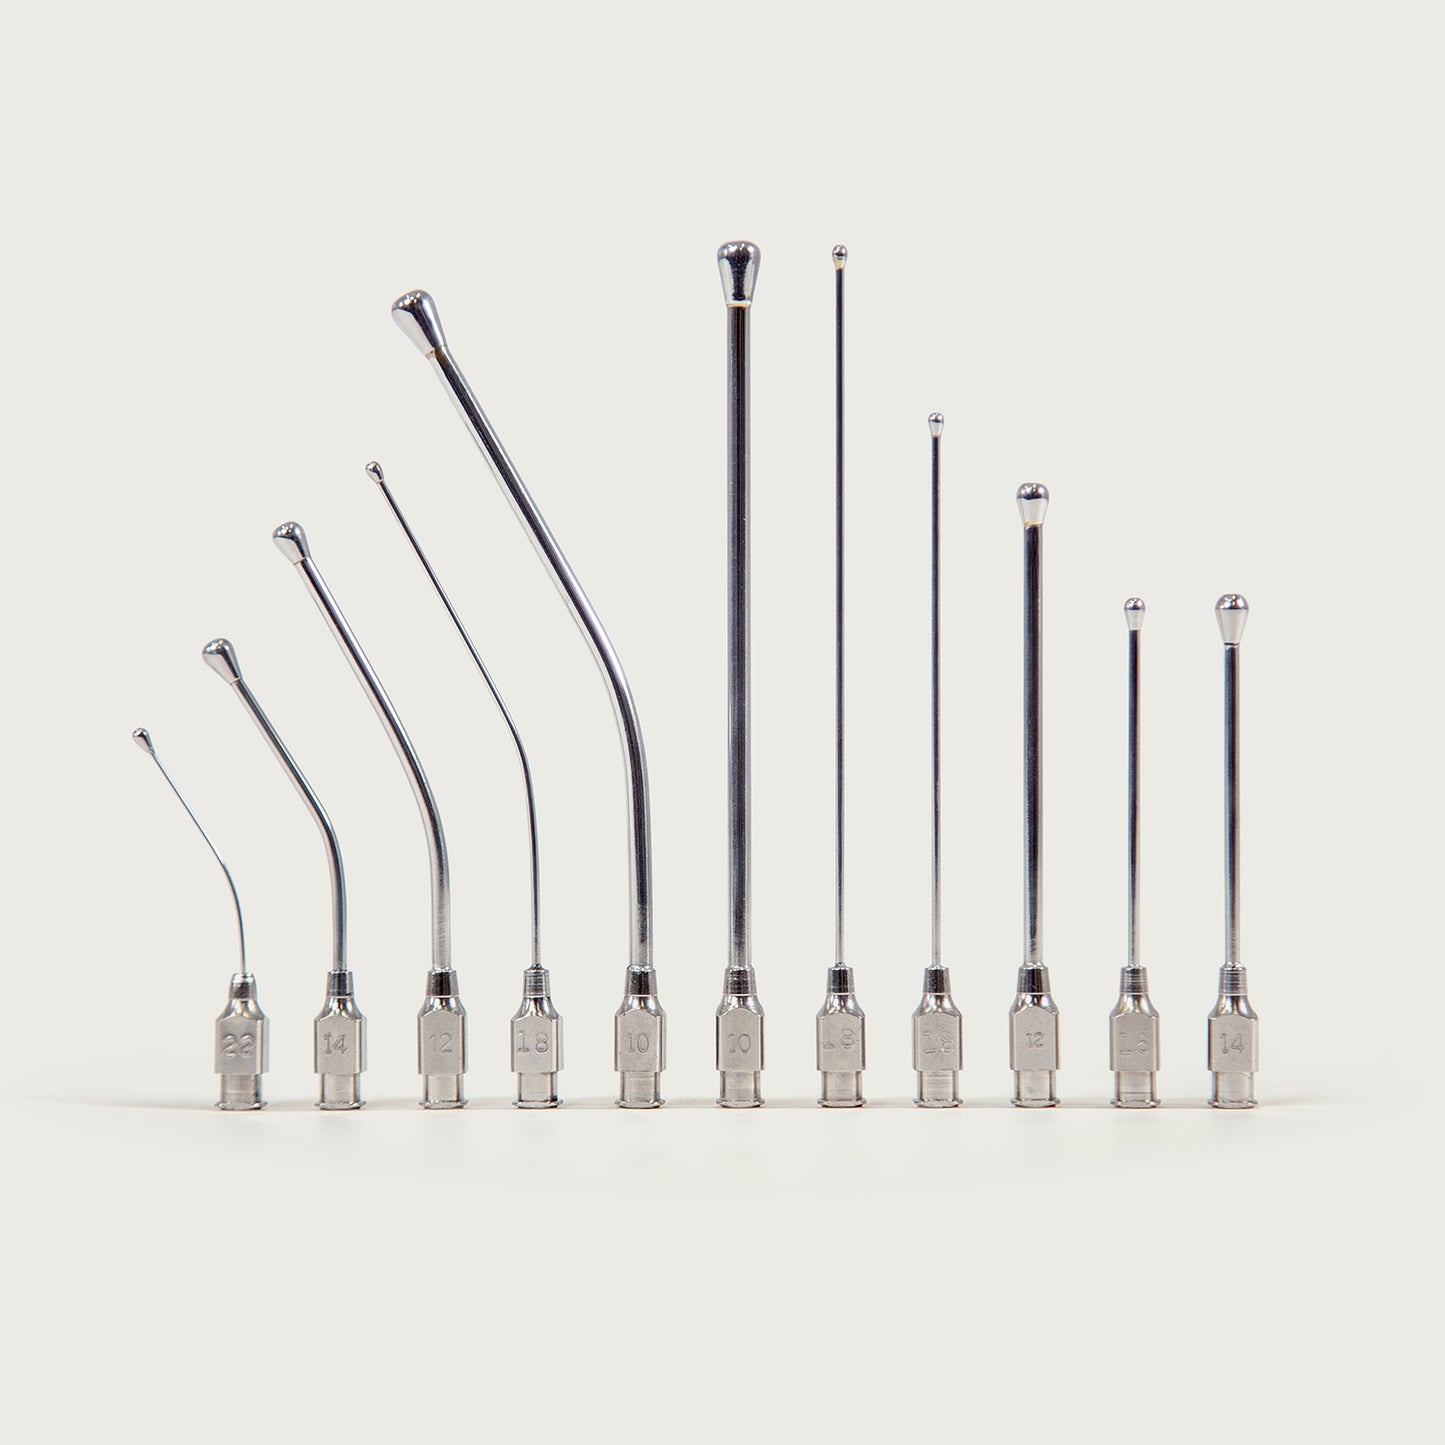 surgical tools for vets provided by kvp showing dosing needles